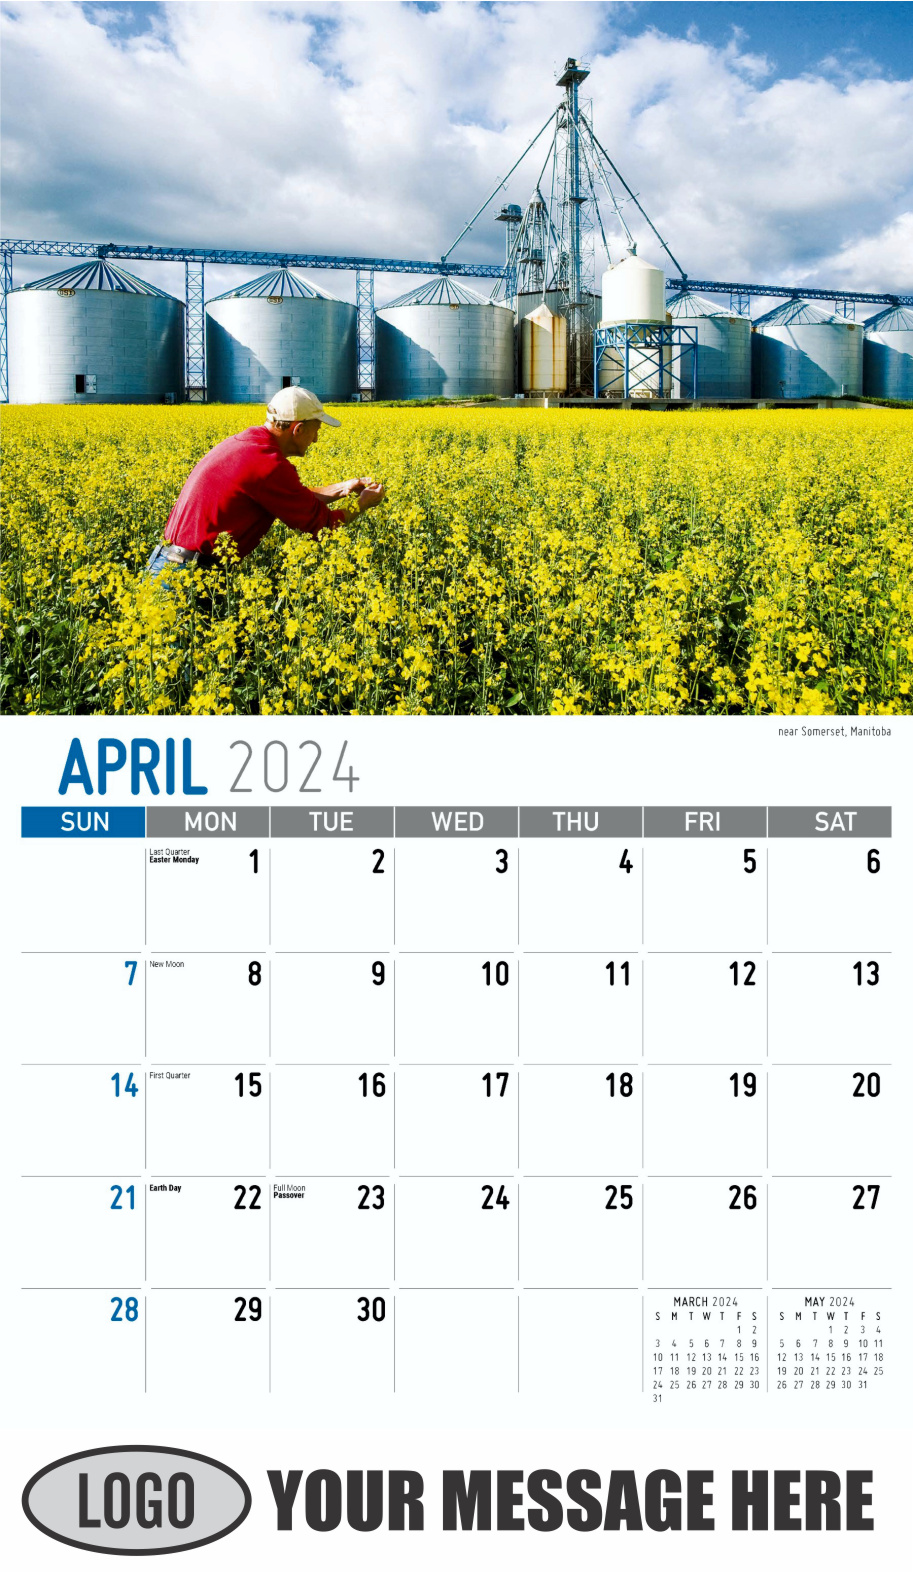 Scenes of Western Canada 2024 Business Promotional Wall Calendar - April